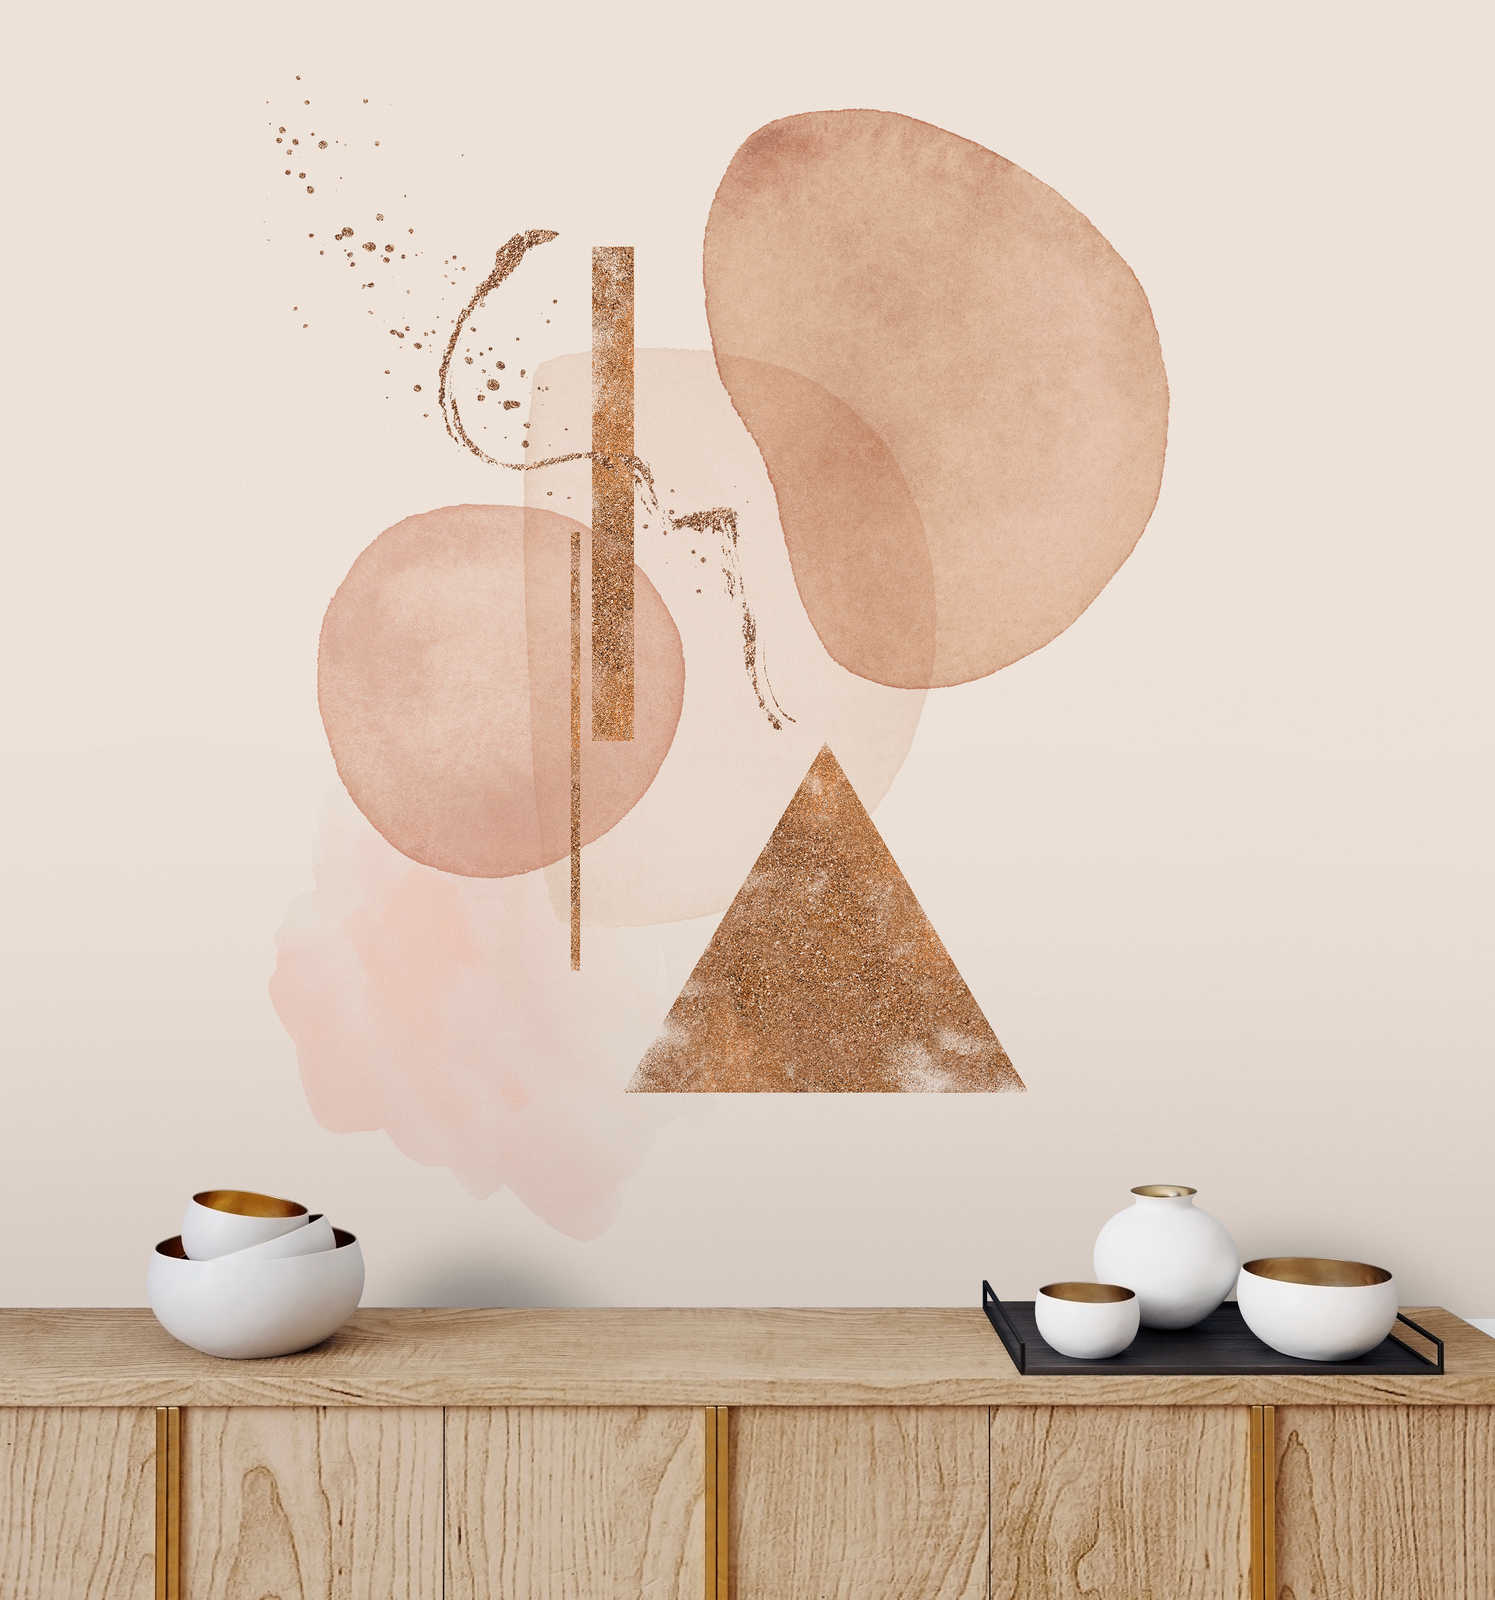             Gold Mine 2 - Beige wall mural with gold watercolour & abstract shapes
        